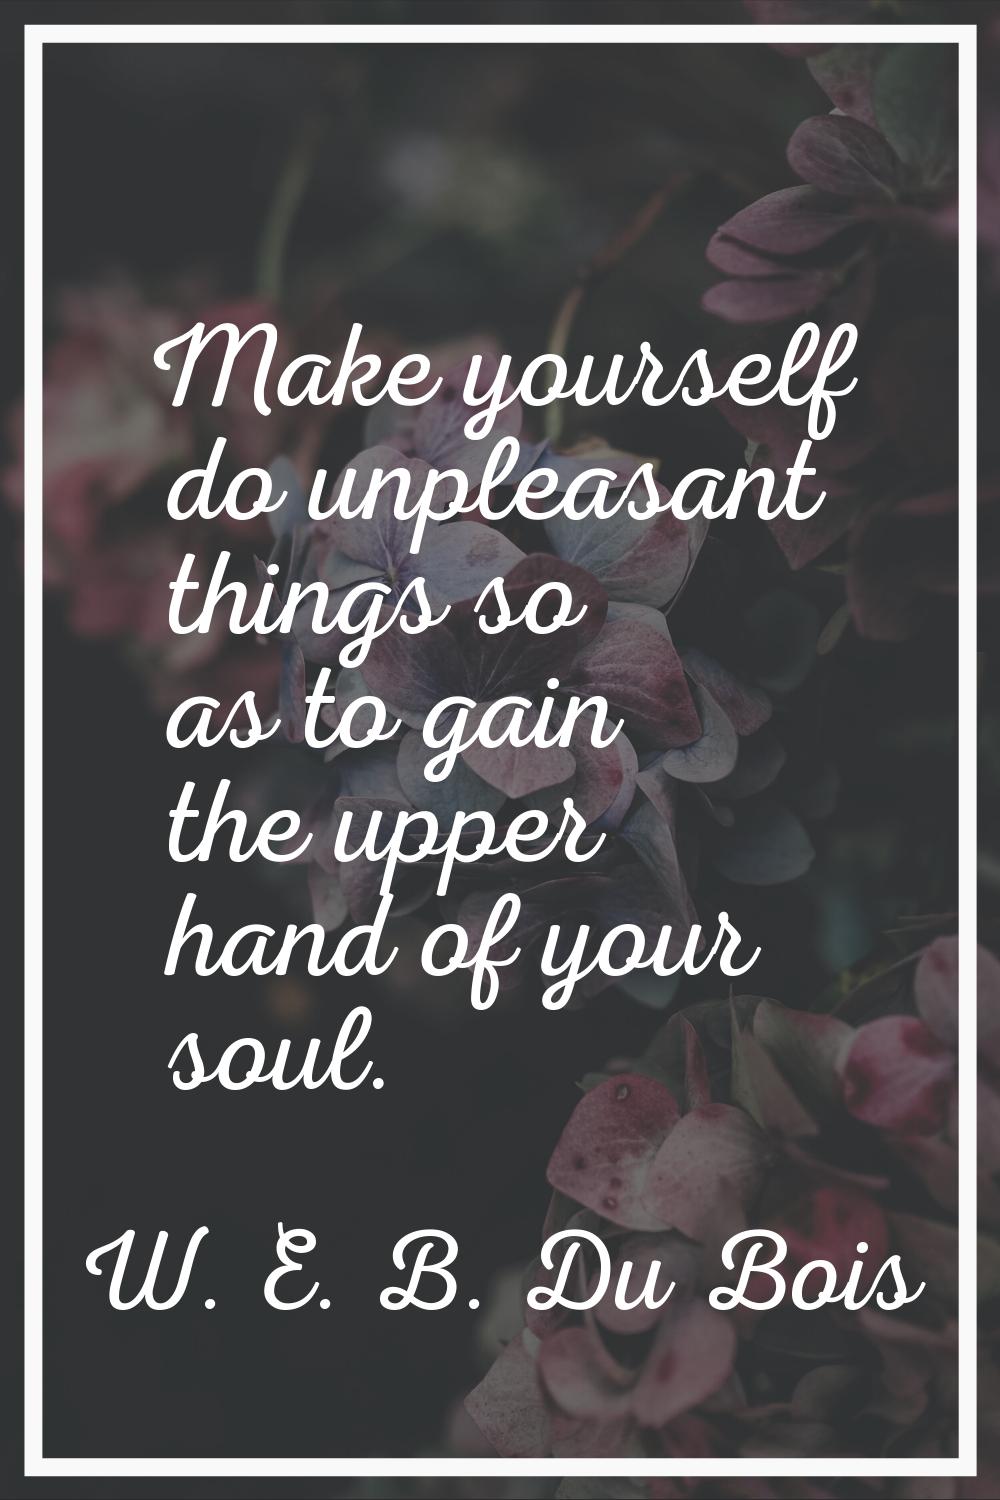 Make yourself do unpleasant things so as to gain the upper hand of your soul.